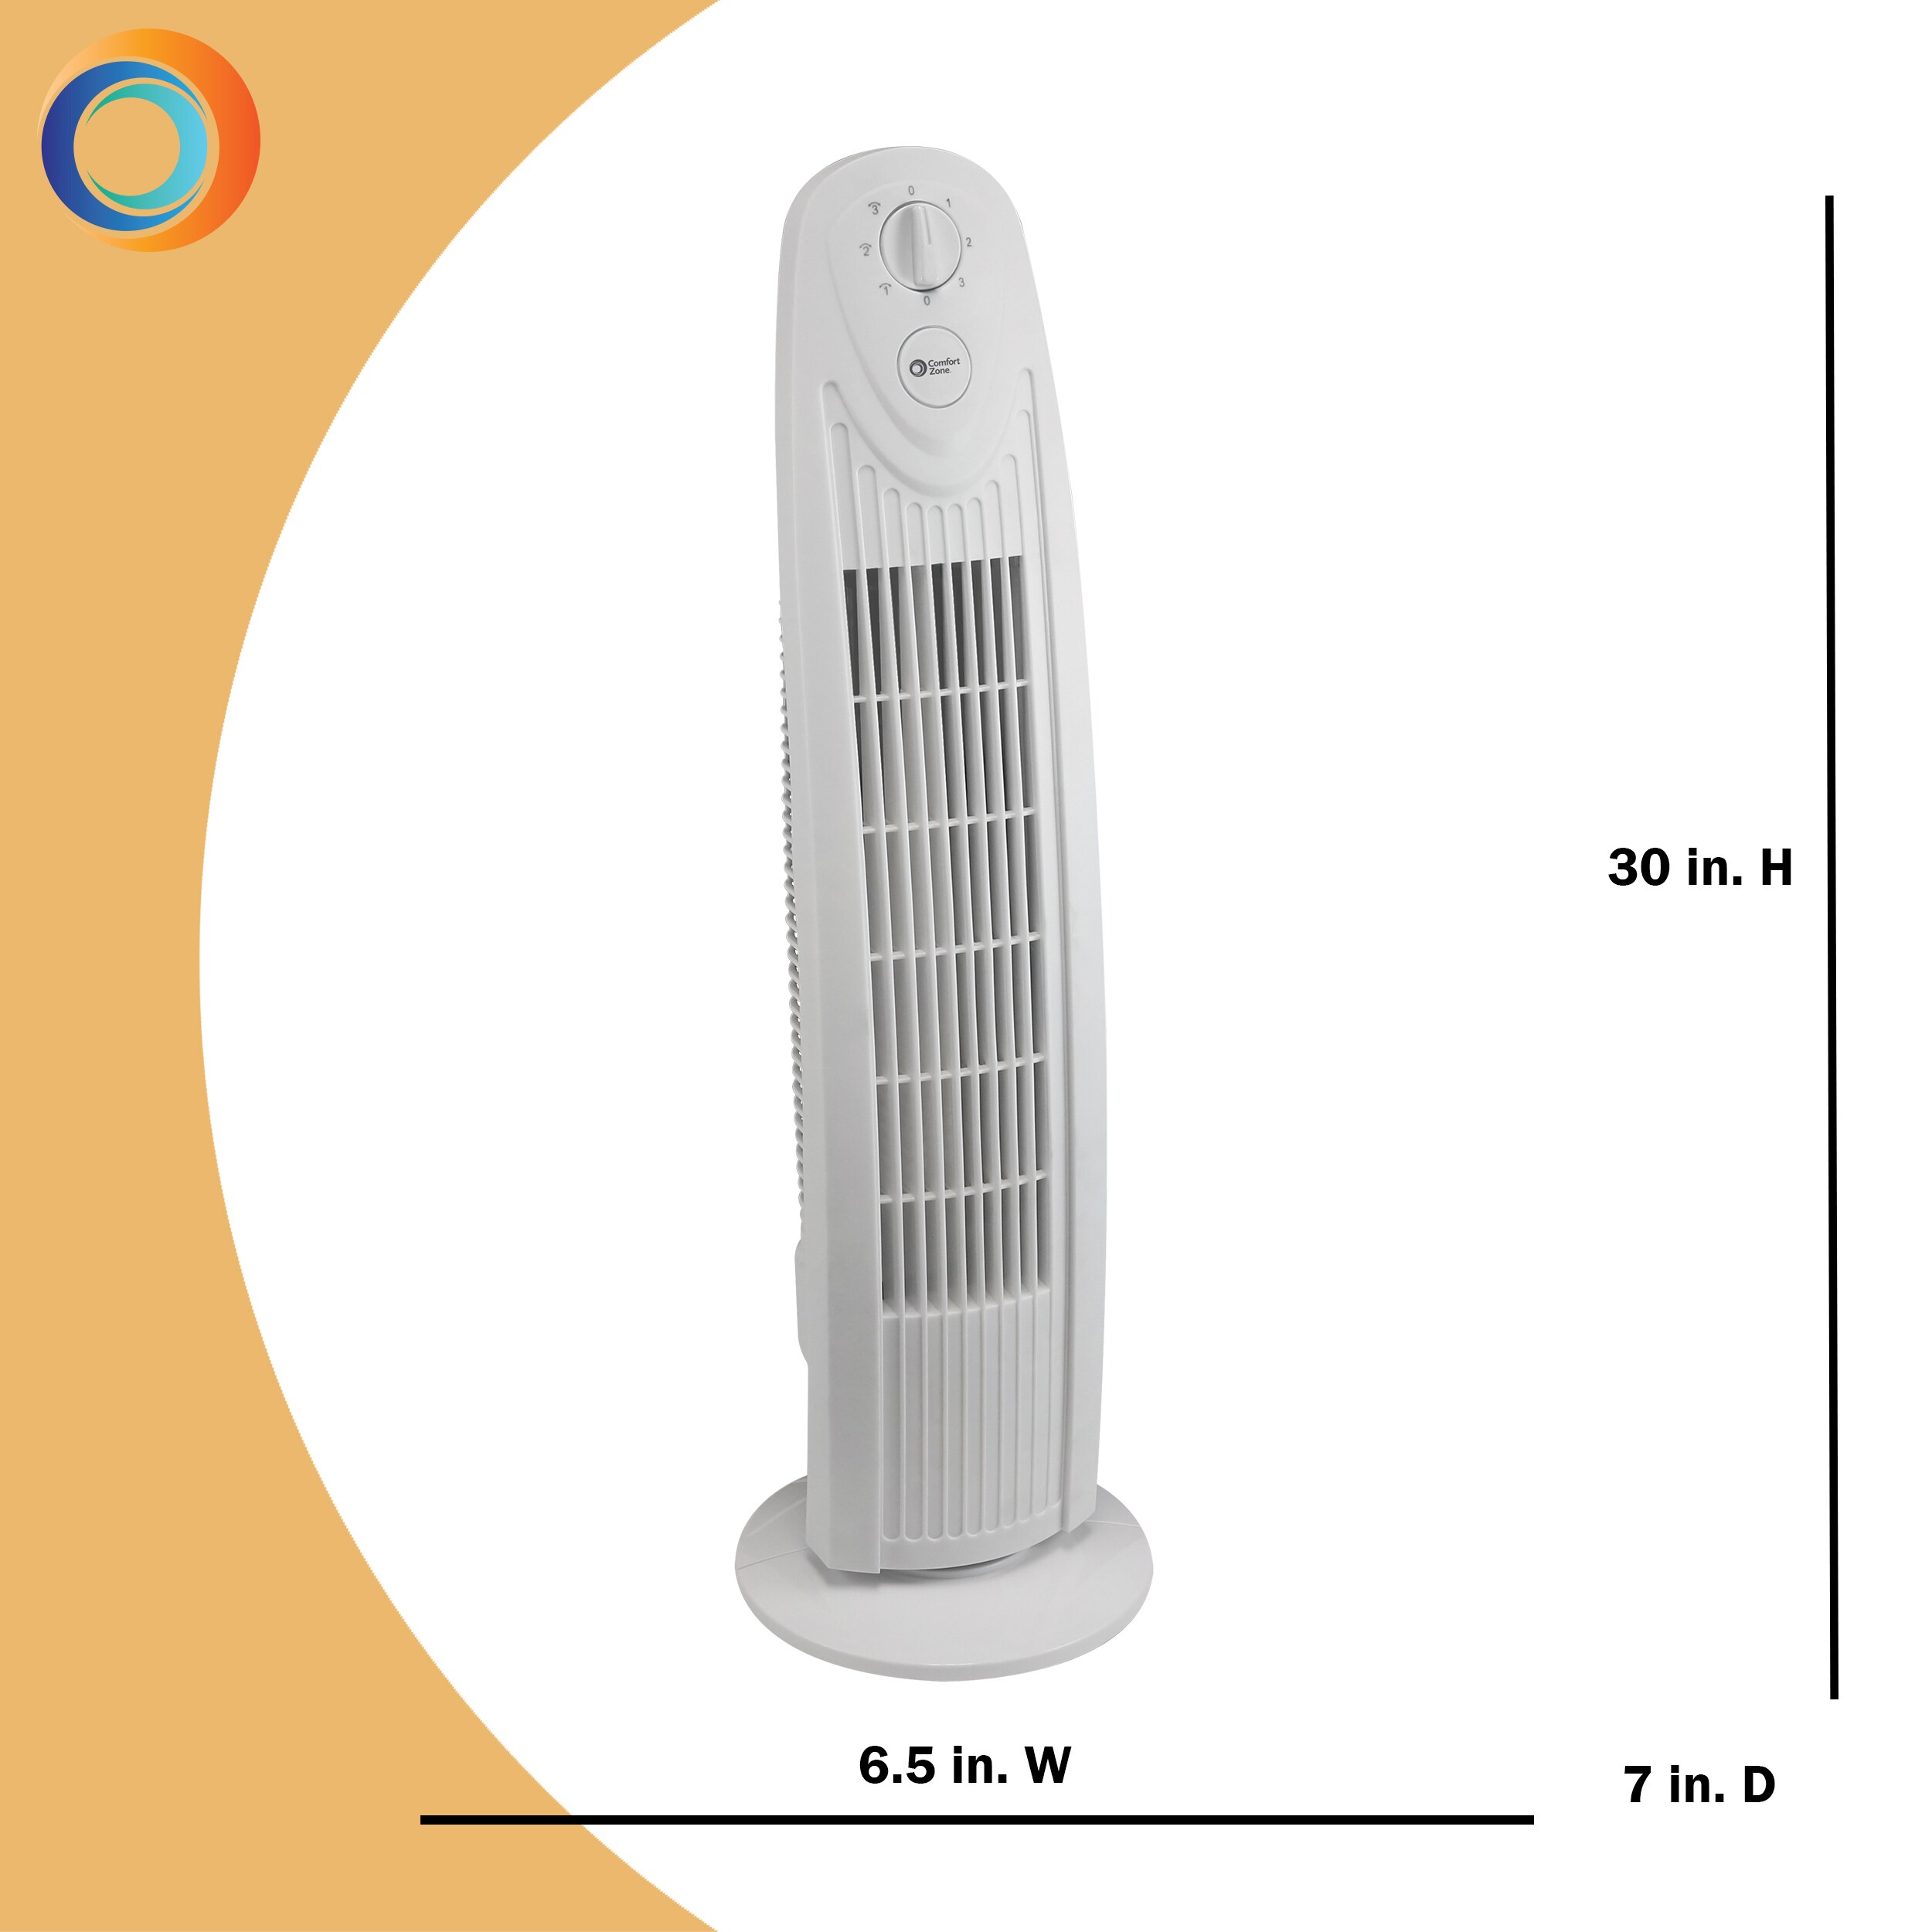 Quiet and Powerful Oscillating 29 Inch 3 Speed Tower Fan for Home or Office 